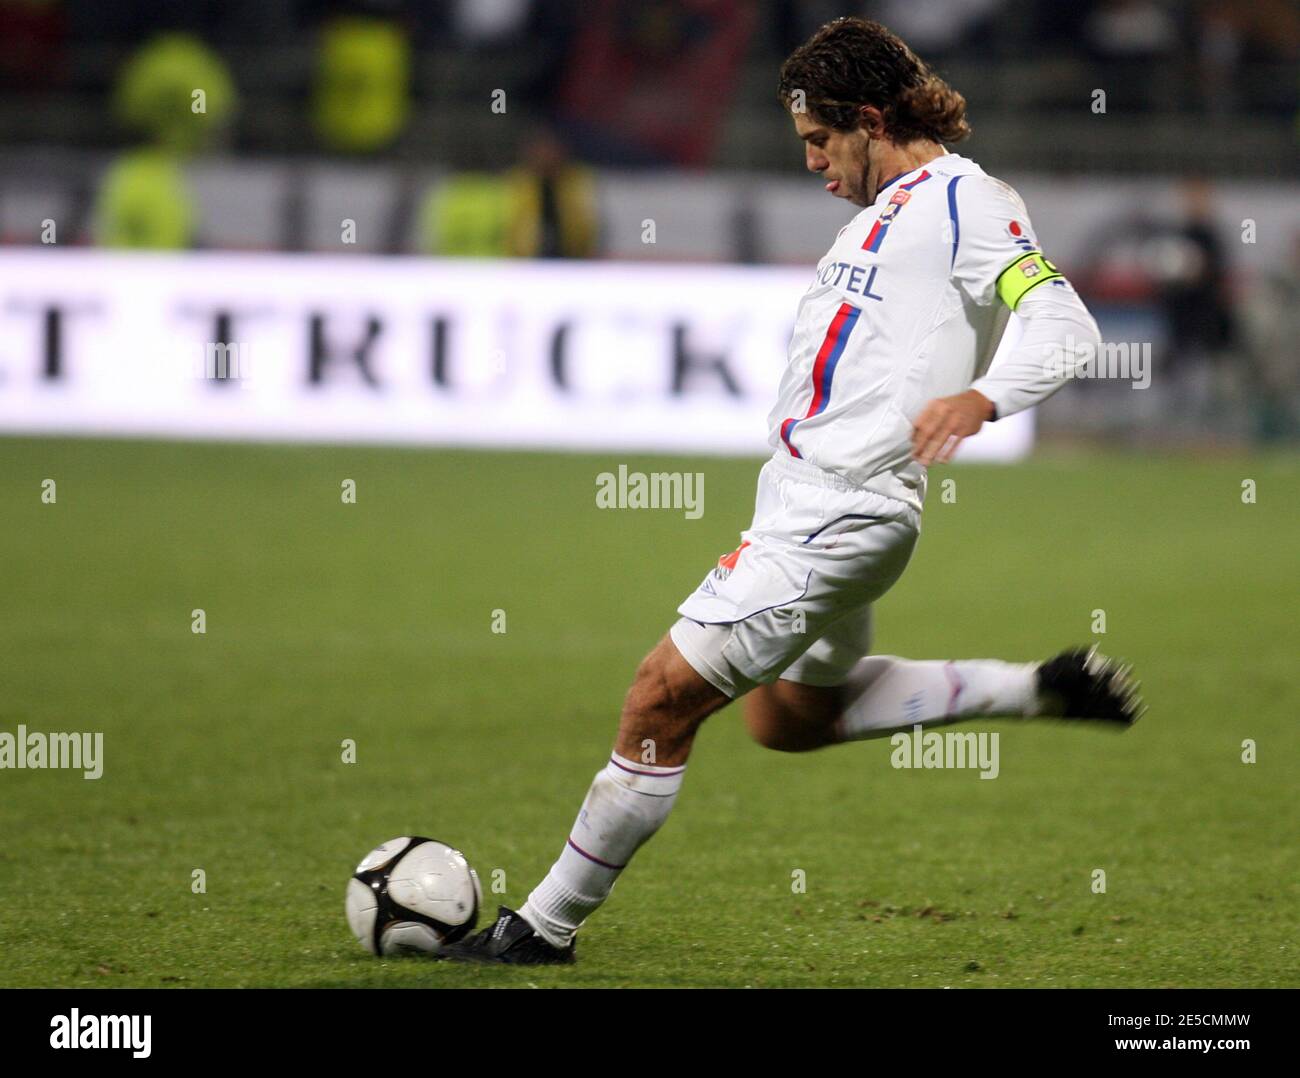 Lyon's Pernambucano Juninho during the French Premier League soccer match, Olympique Lyonnais vs Lille olympique sporting club in Lyon, France on October 18, 2008. The match ended in a 2-2 draw. Photos by Vincent Dargent/Cameleon/ABACAPRESS.COM Stock Photo